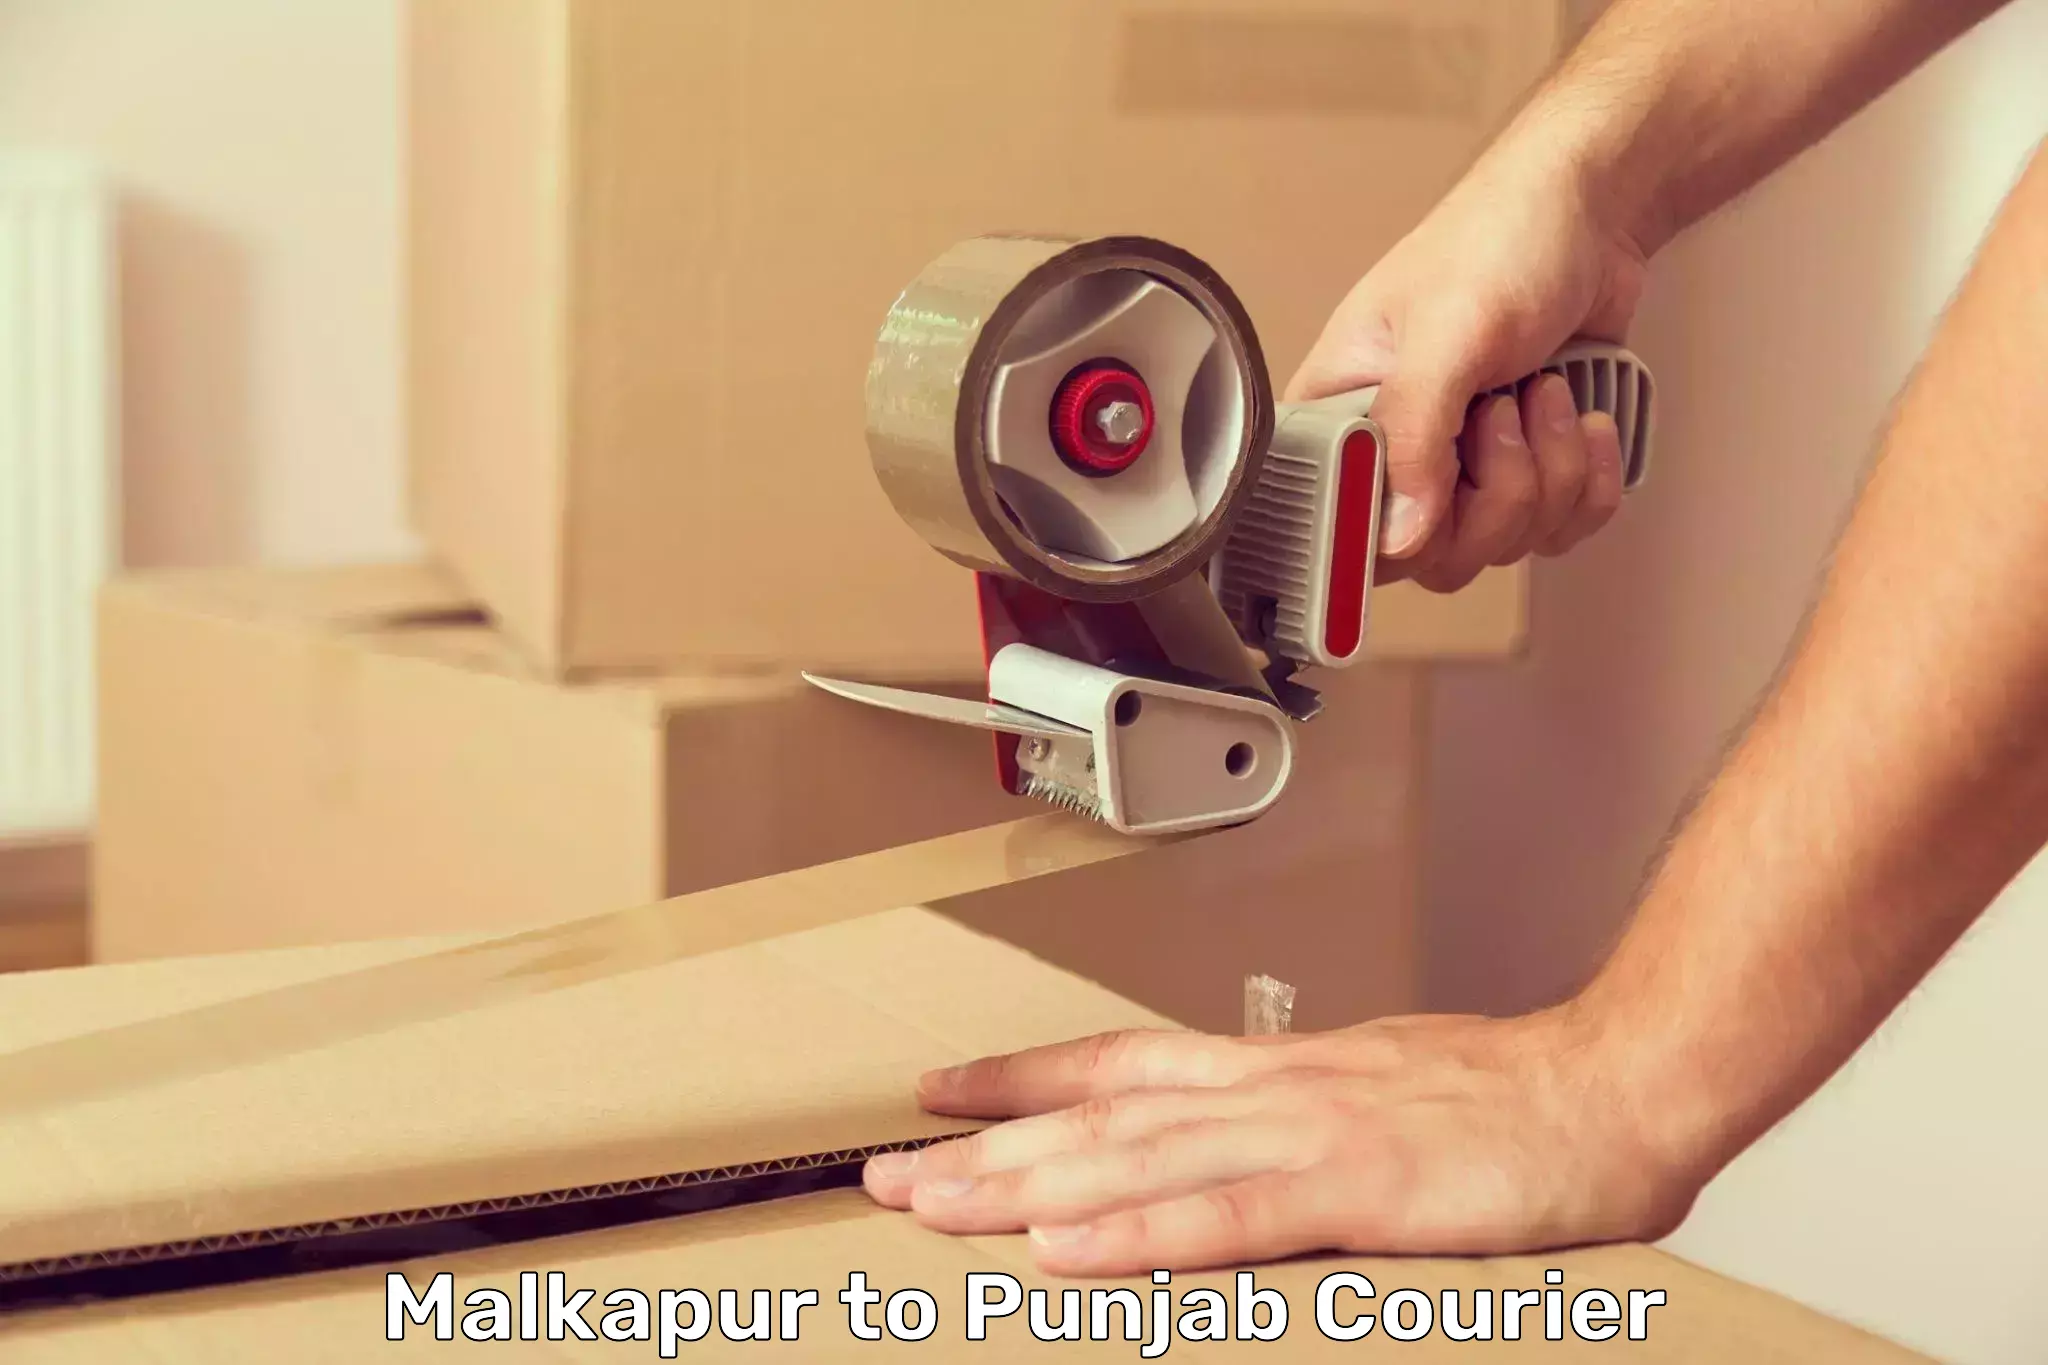 Reliable courier service Malkapur to Punjab